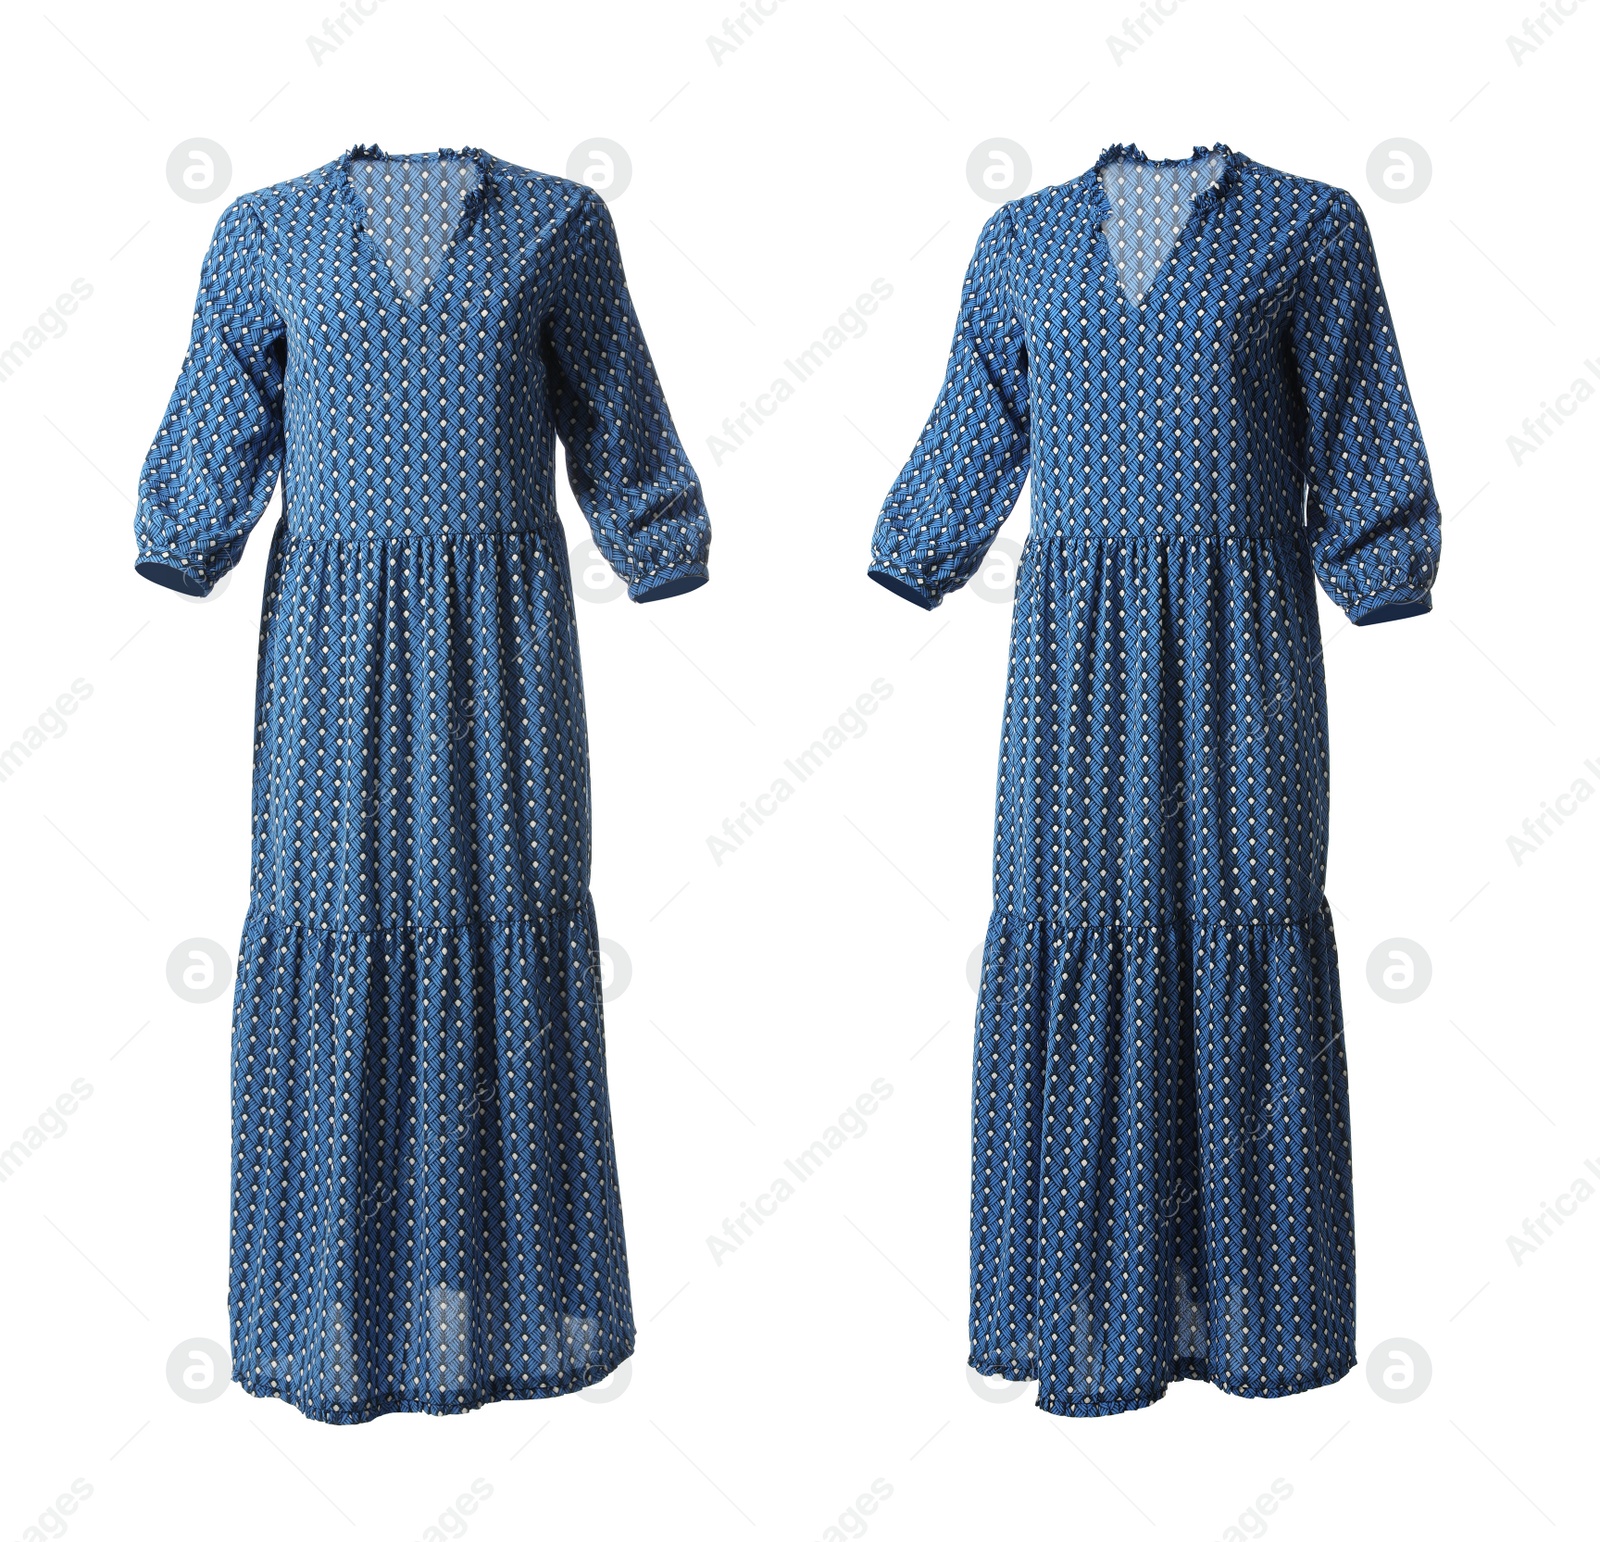 Image of Beautiful long blue dresses from different views on white background